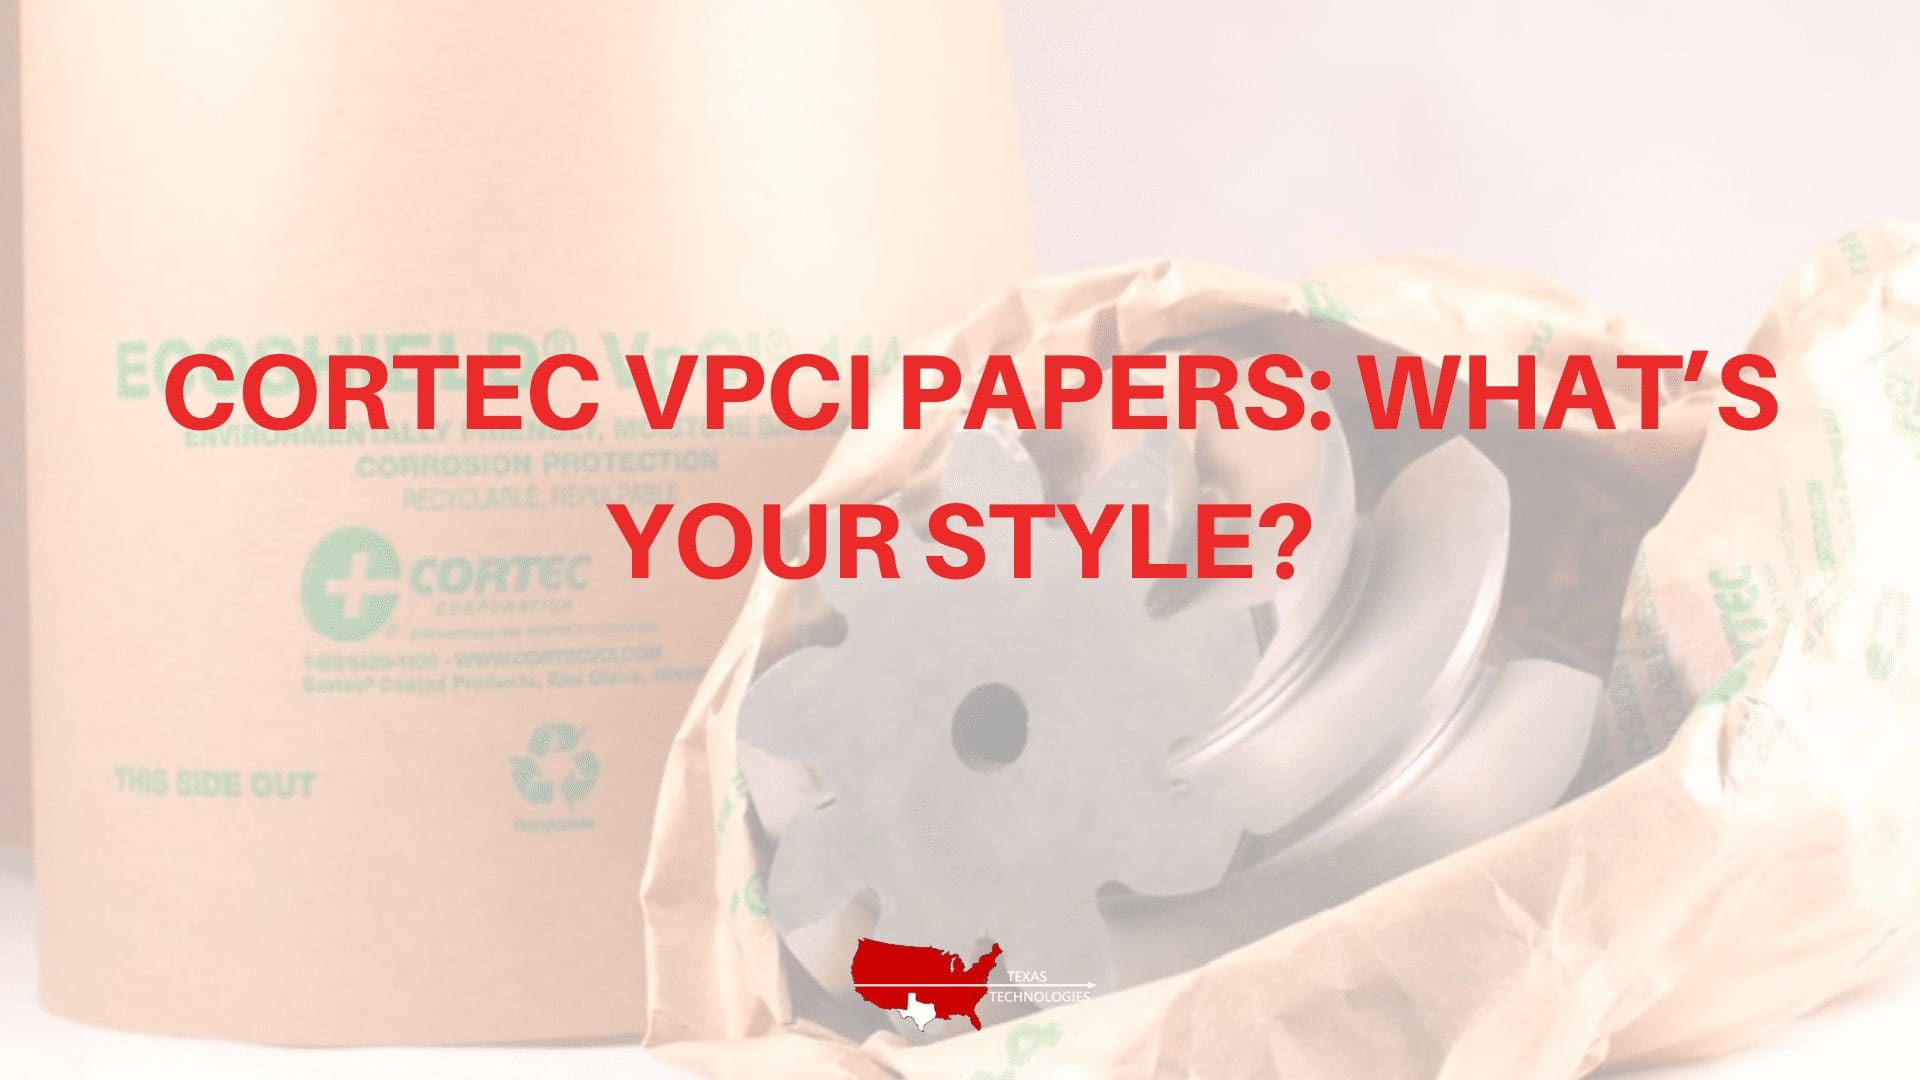 Cortec VpCI Papers: What’s Your Style?